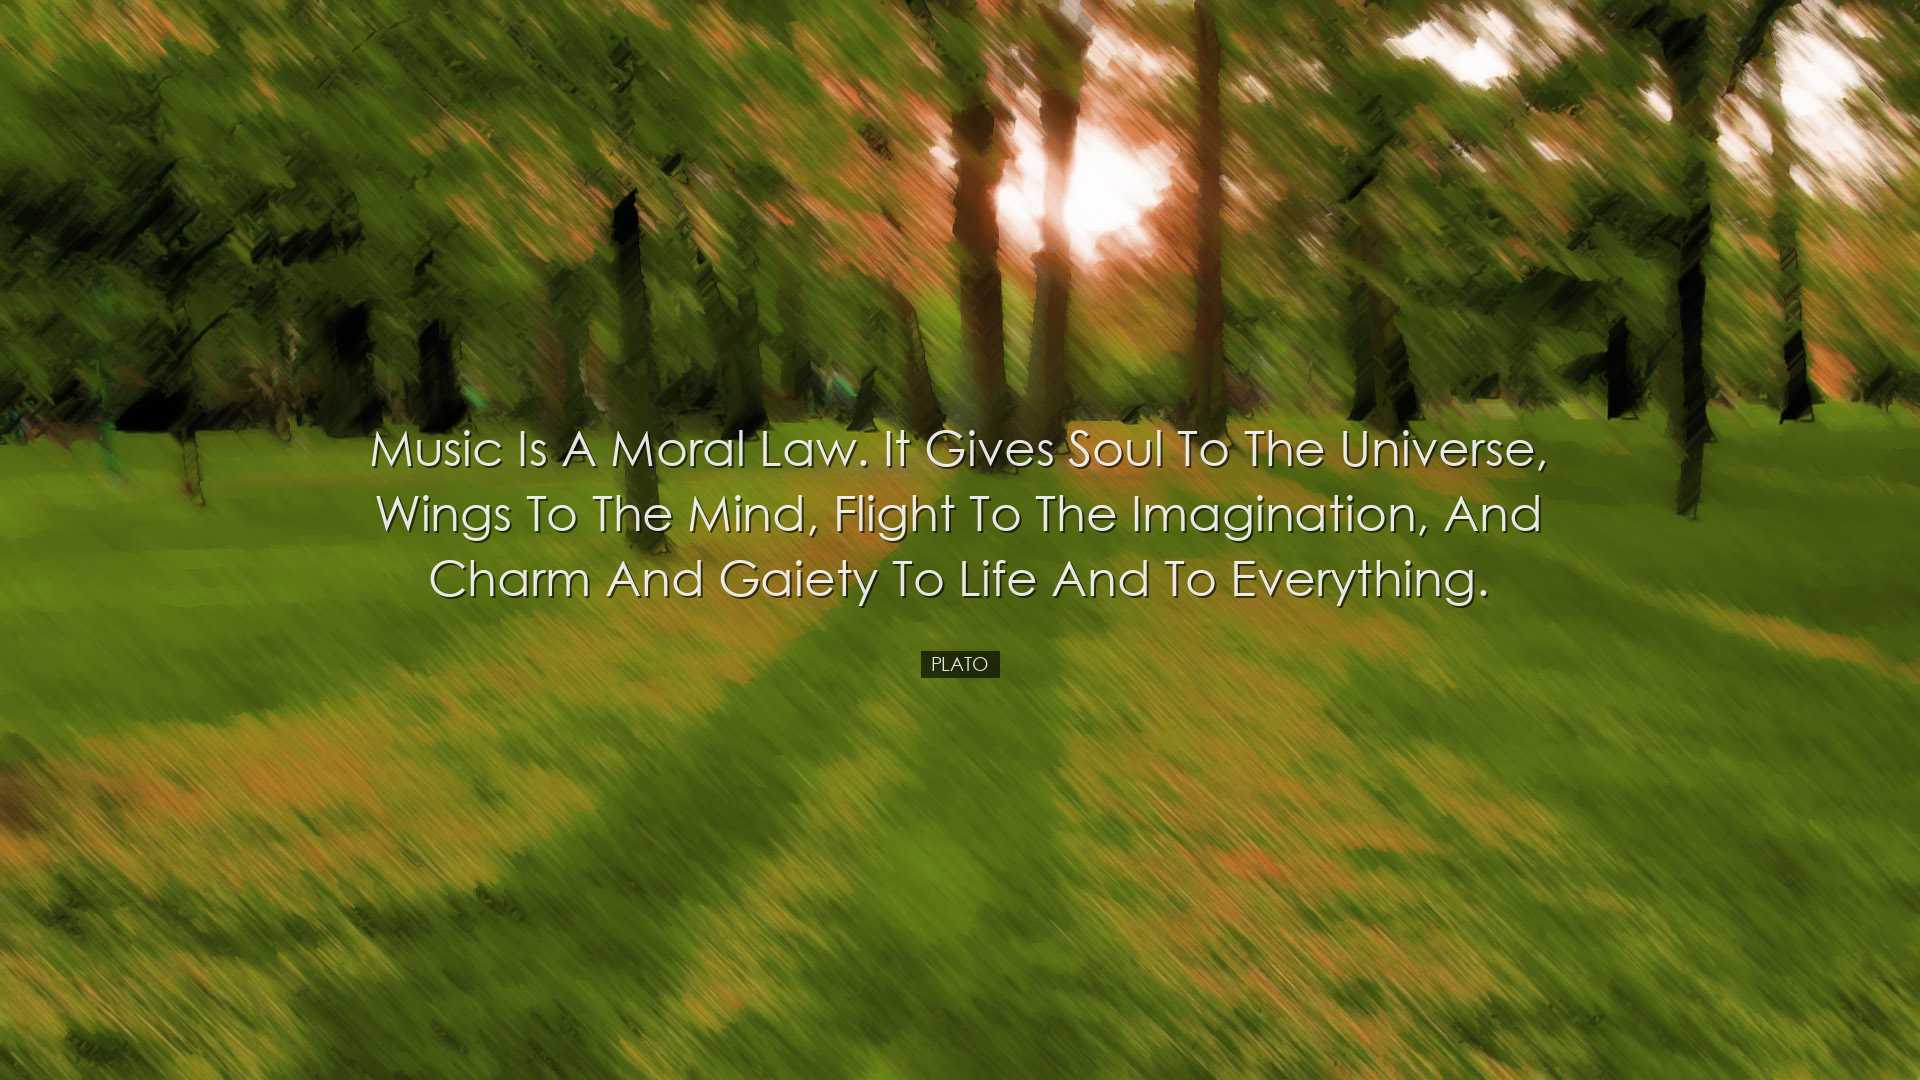 Music is a moral law. It gives soul to the universe, wings to the